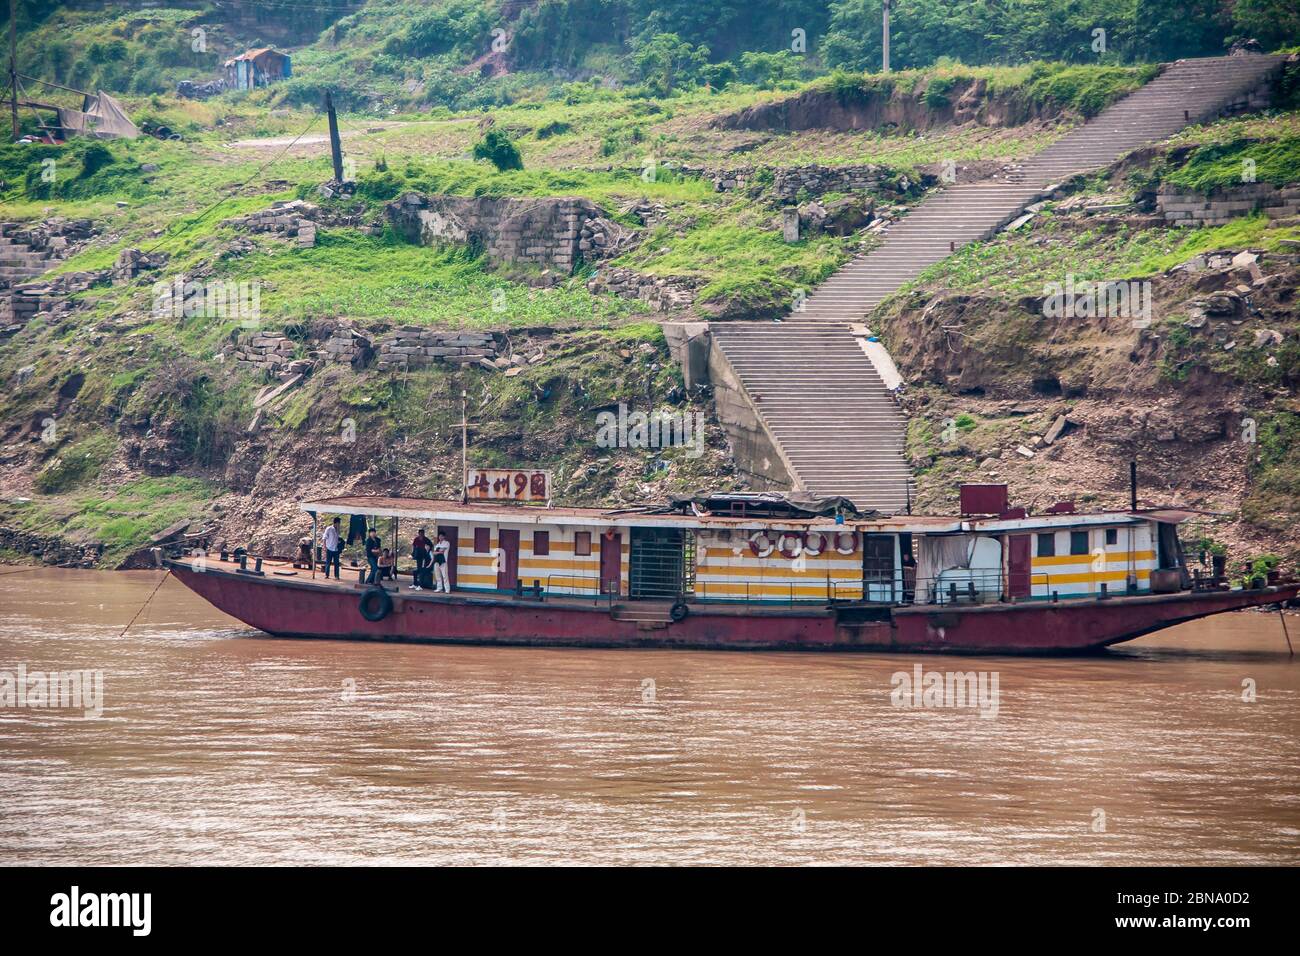 Fengdu, Chongqing, China - May 8, 2010: Yangtze River. Closeup of cheap small hotel barge on brown water with people on deck, moored on green shorelin Stock Photo